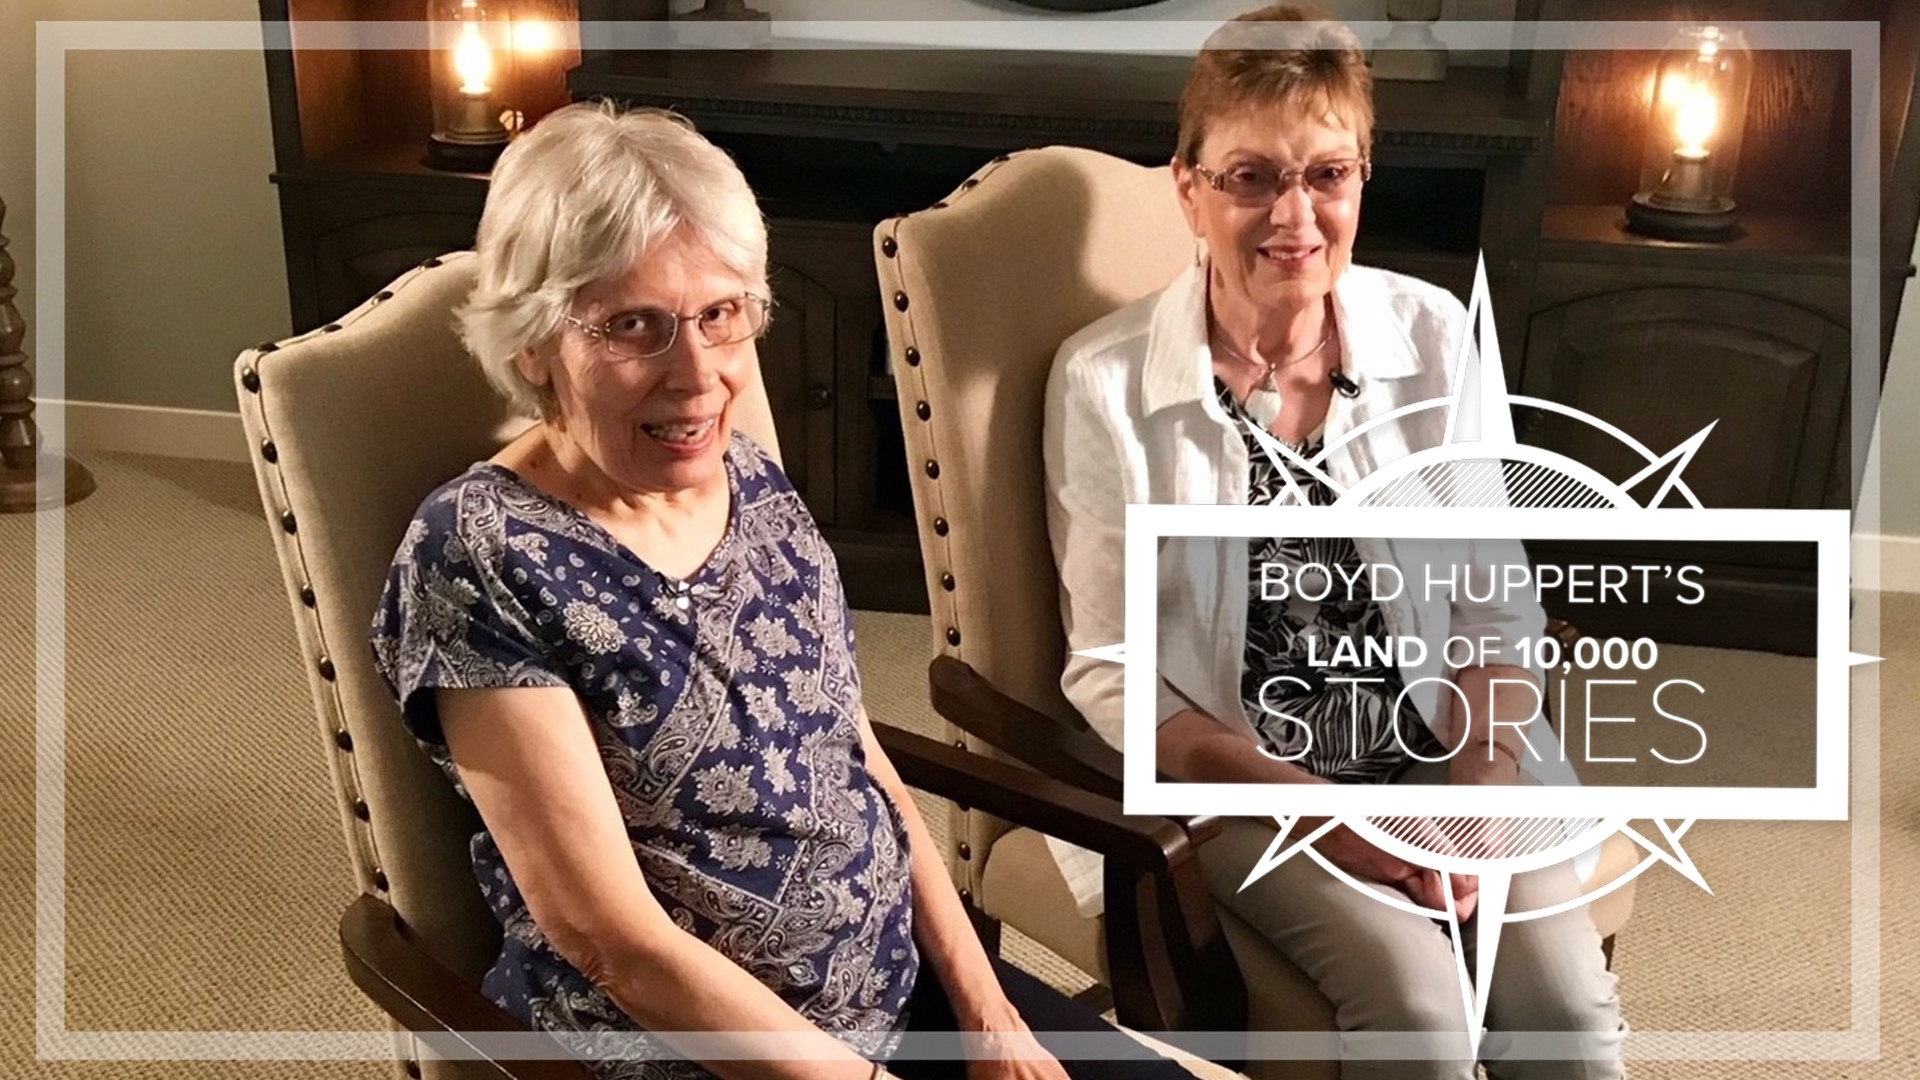 In 2018, DNA tests confirmed Denice Juneski and Linda Jourdeans were switched at birth in 1945.